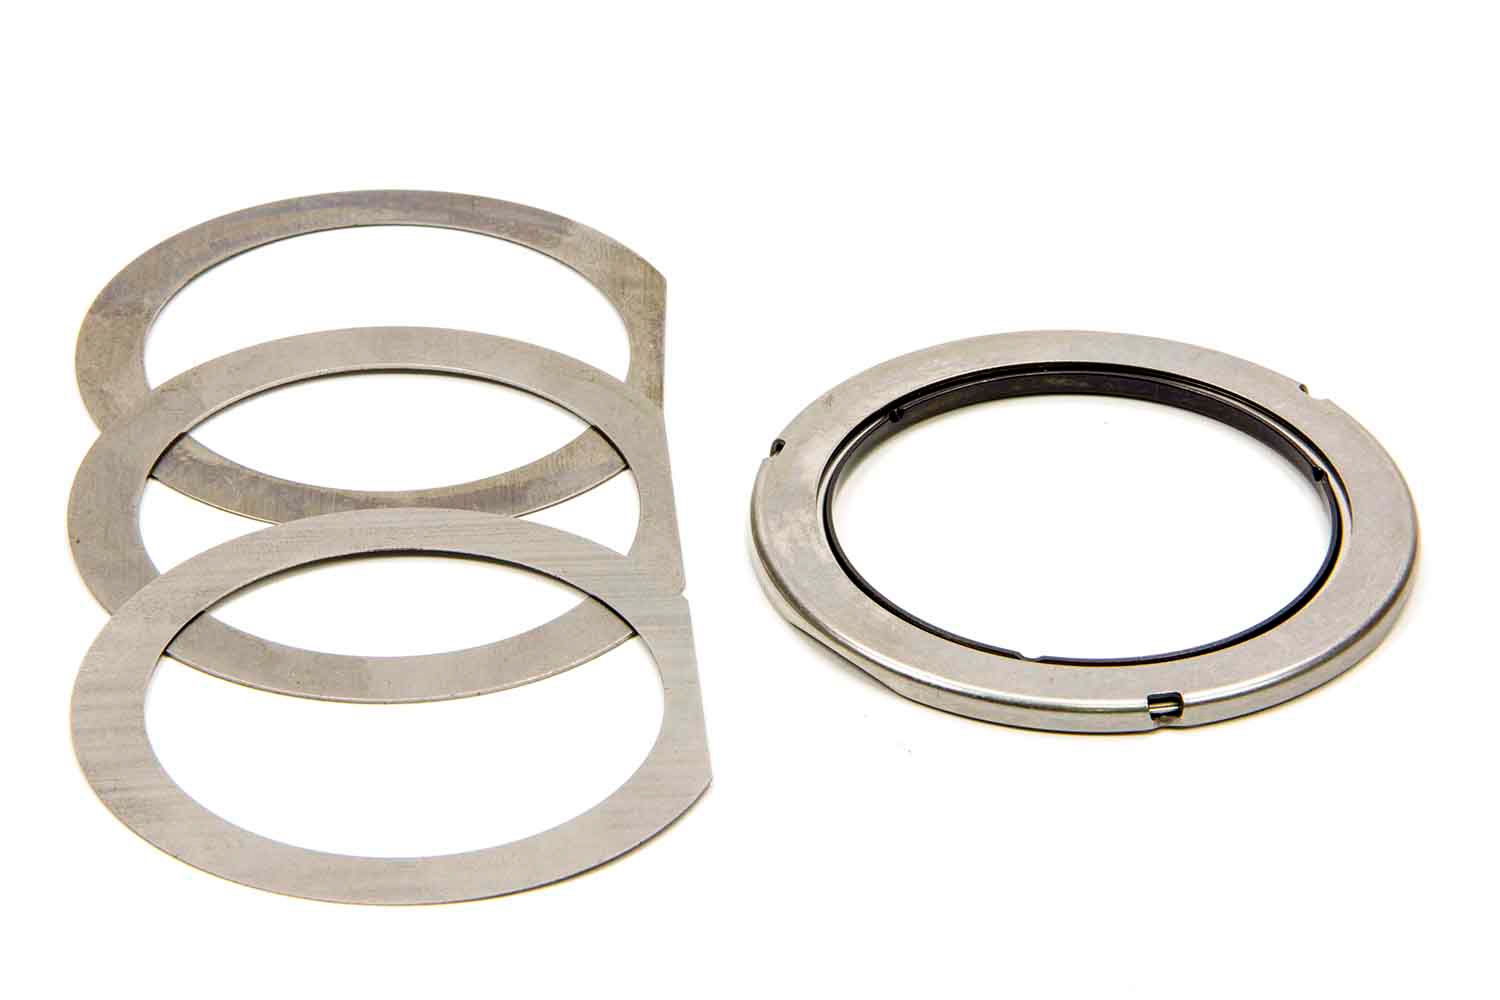 TCI 224400 - Rear Case Thrust Bearing, 0.010 / 0.015 / 0.020 in Washers Included, Roller, Steel, TH400, Kit